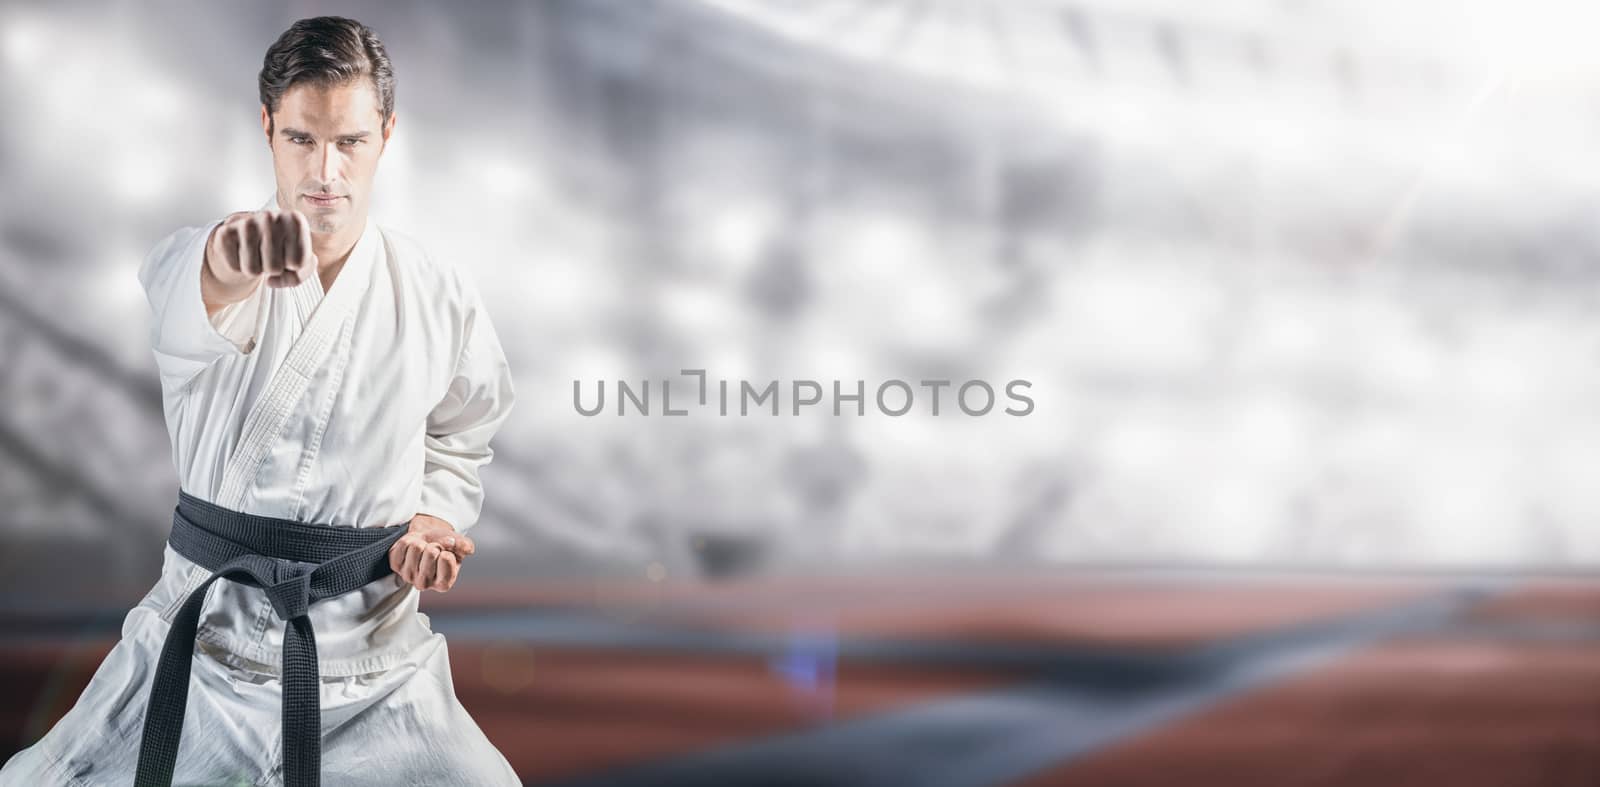 Portrait of fighter performing karate stance against composite image of american stadium